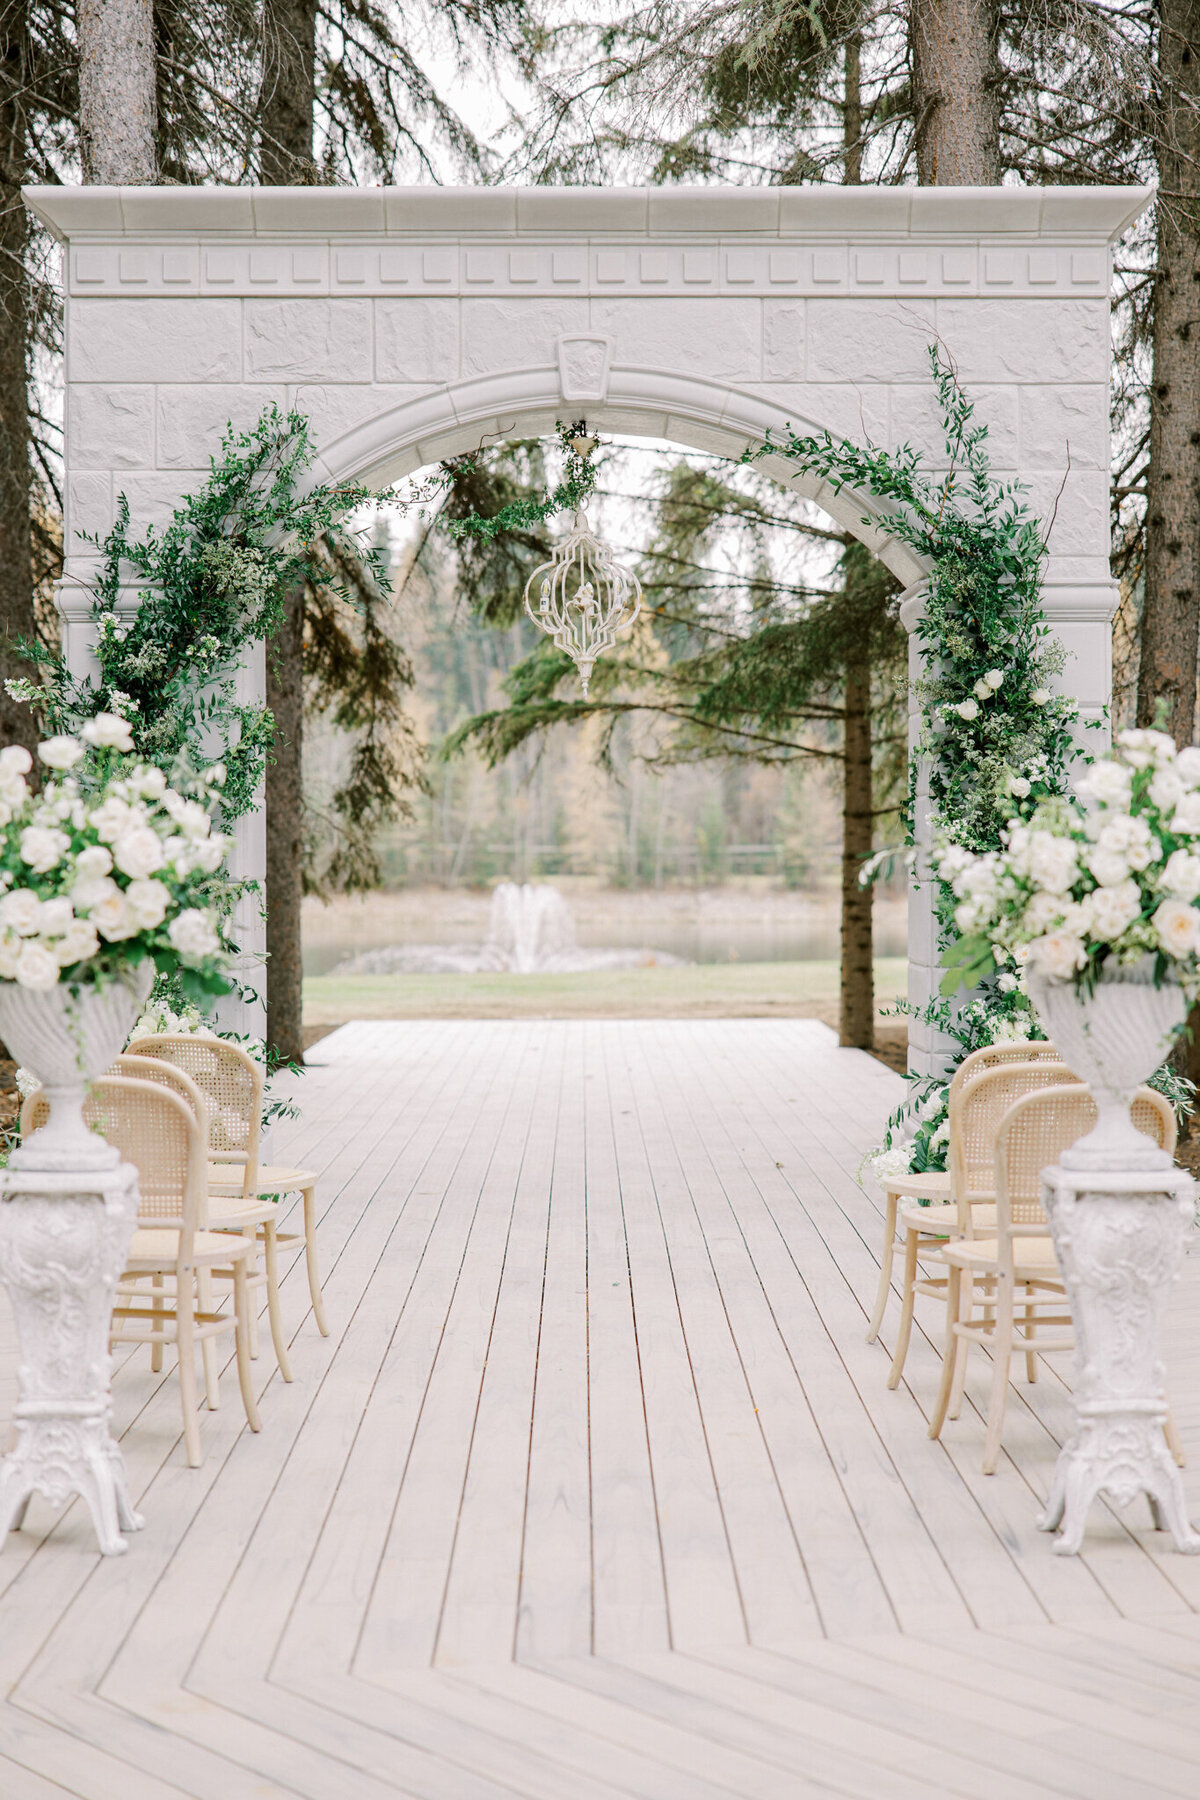 Stunning outdoor ceremony space at Archway Manor Weddings & Events, elegant, timeless, European-inspired Red Deer, Alberta wedding venue, featured on the Brontë Bride Vendor Guide.